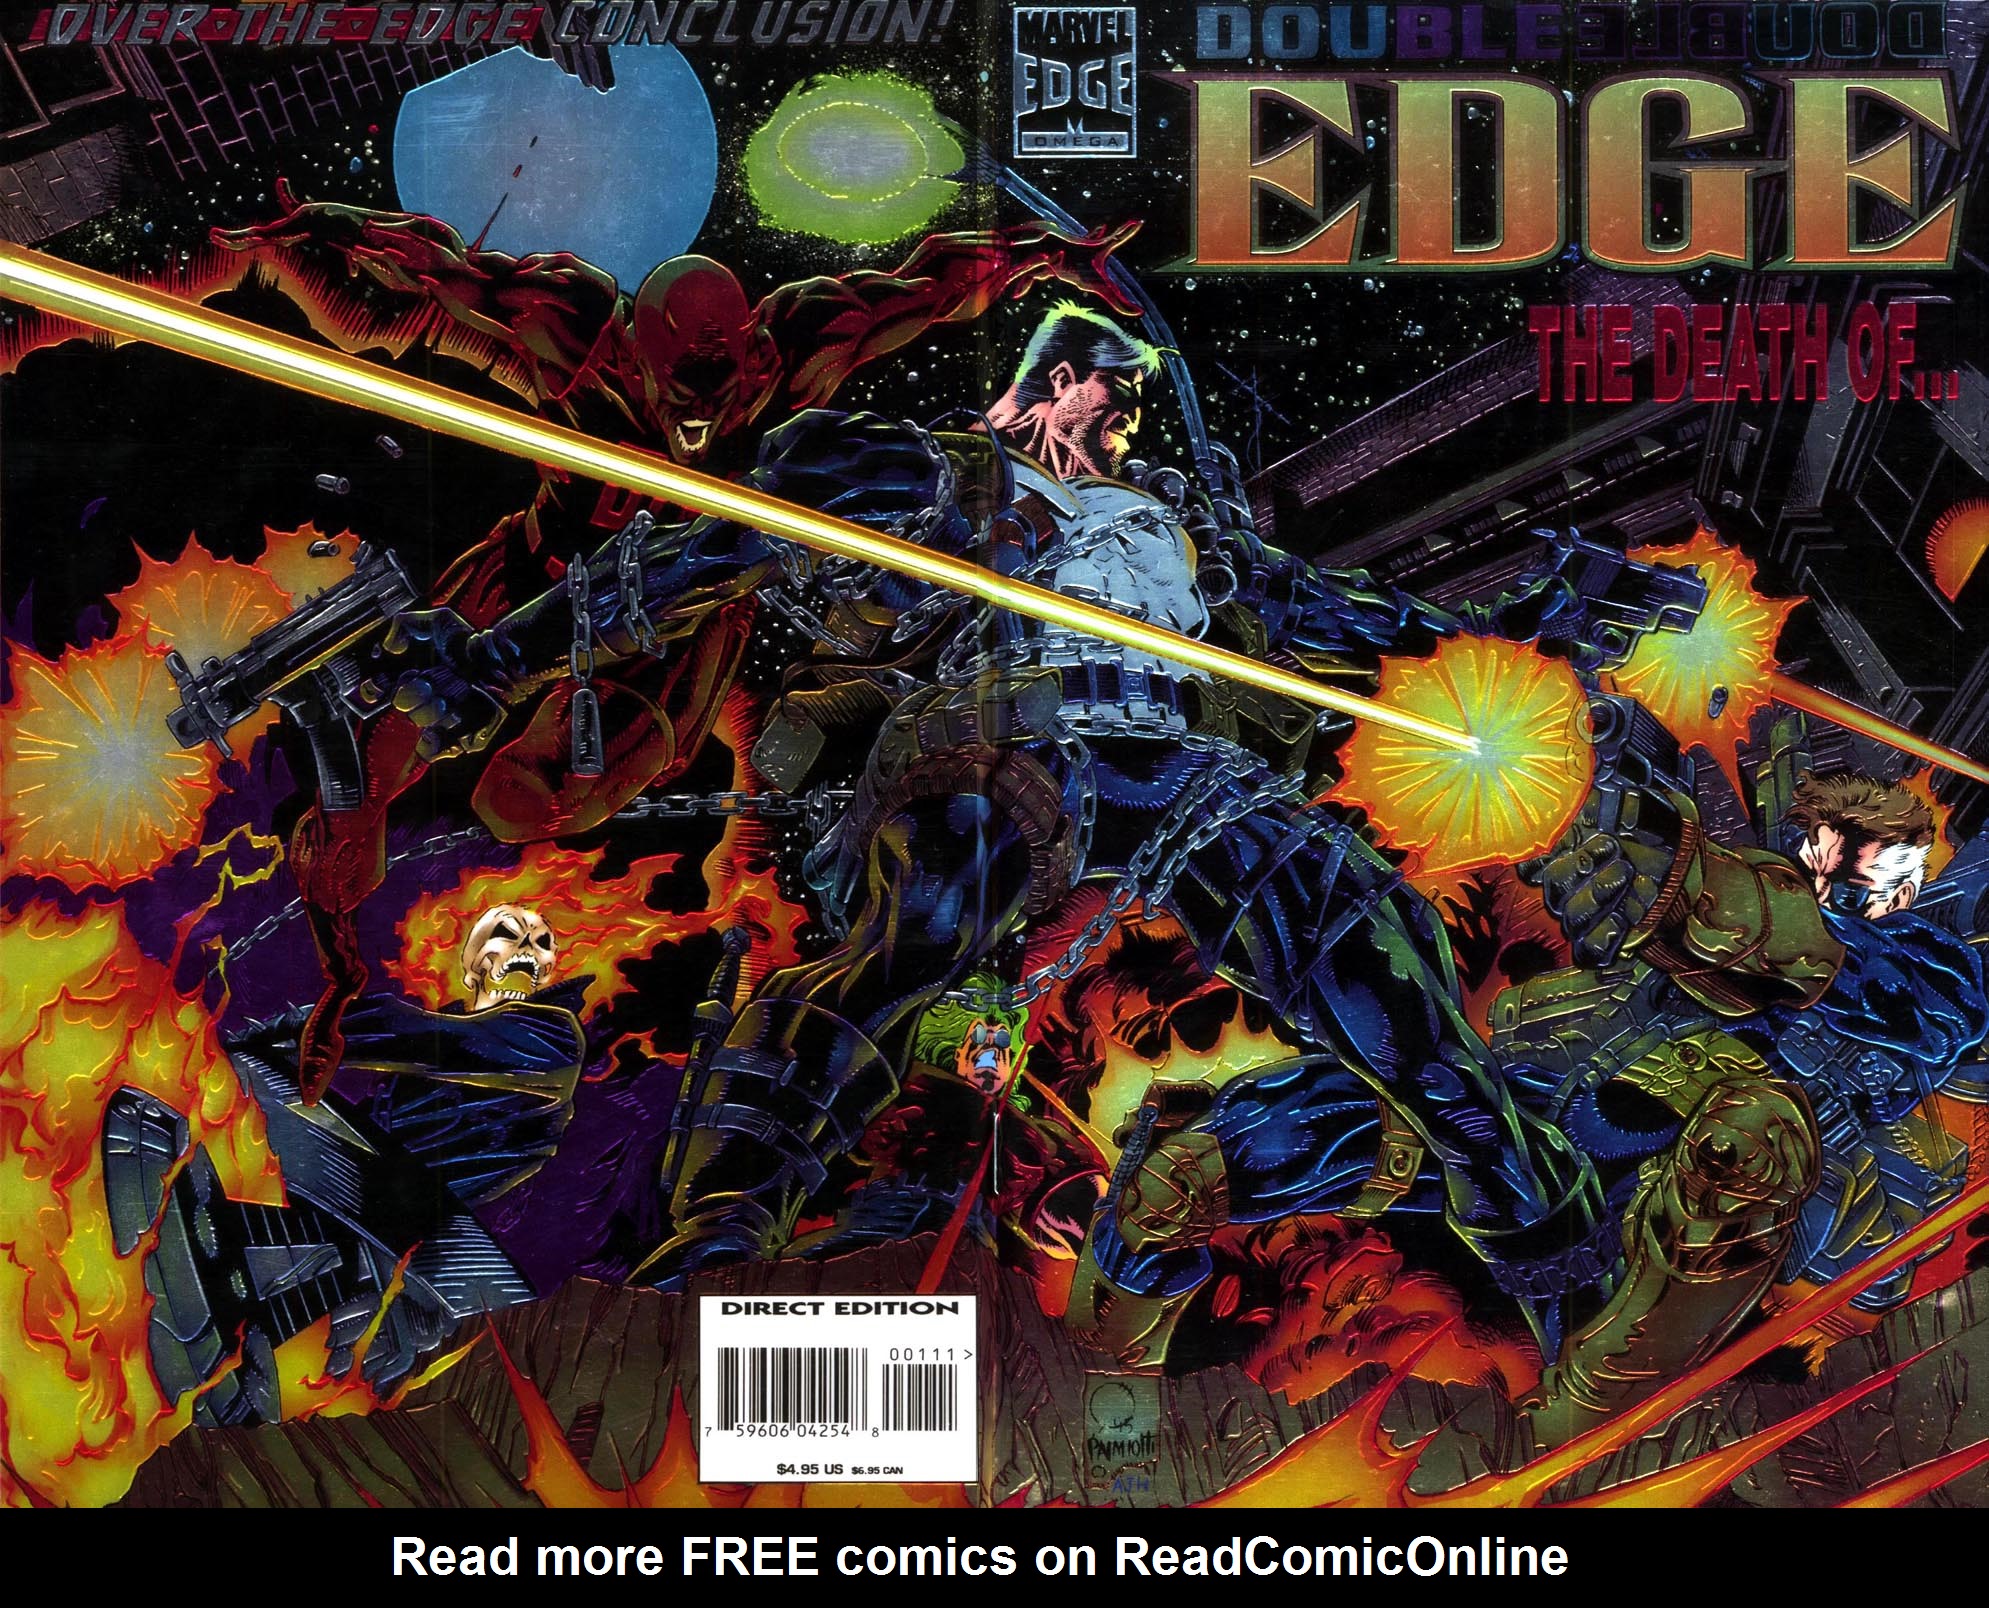 Read online Double Edge comic -  Issue # Issue Omega - 1